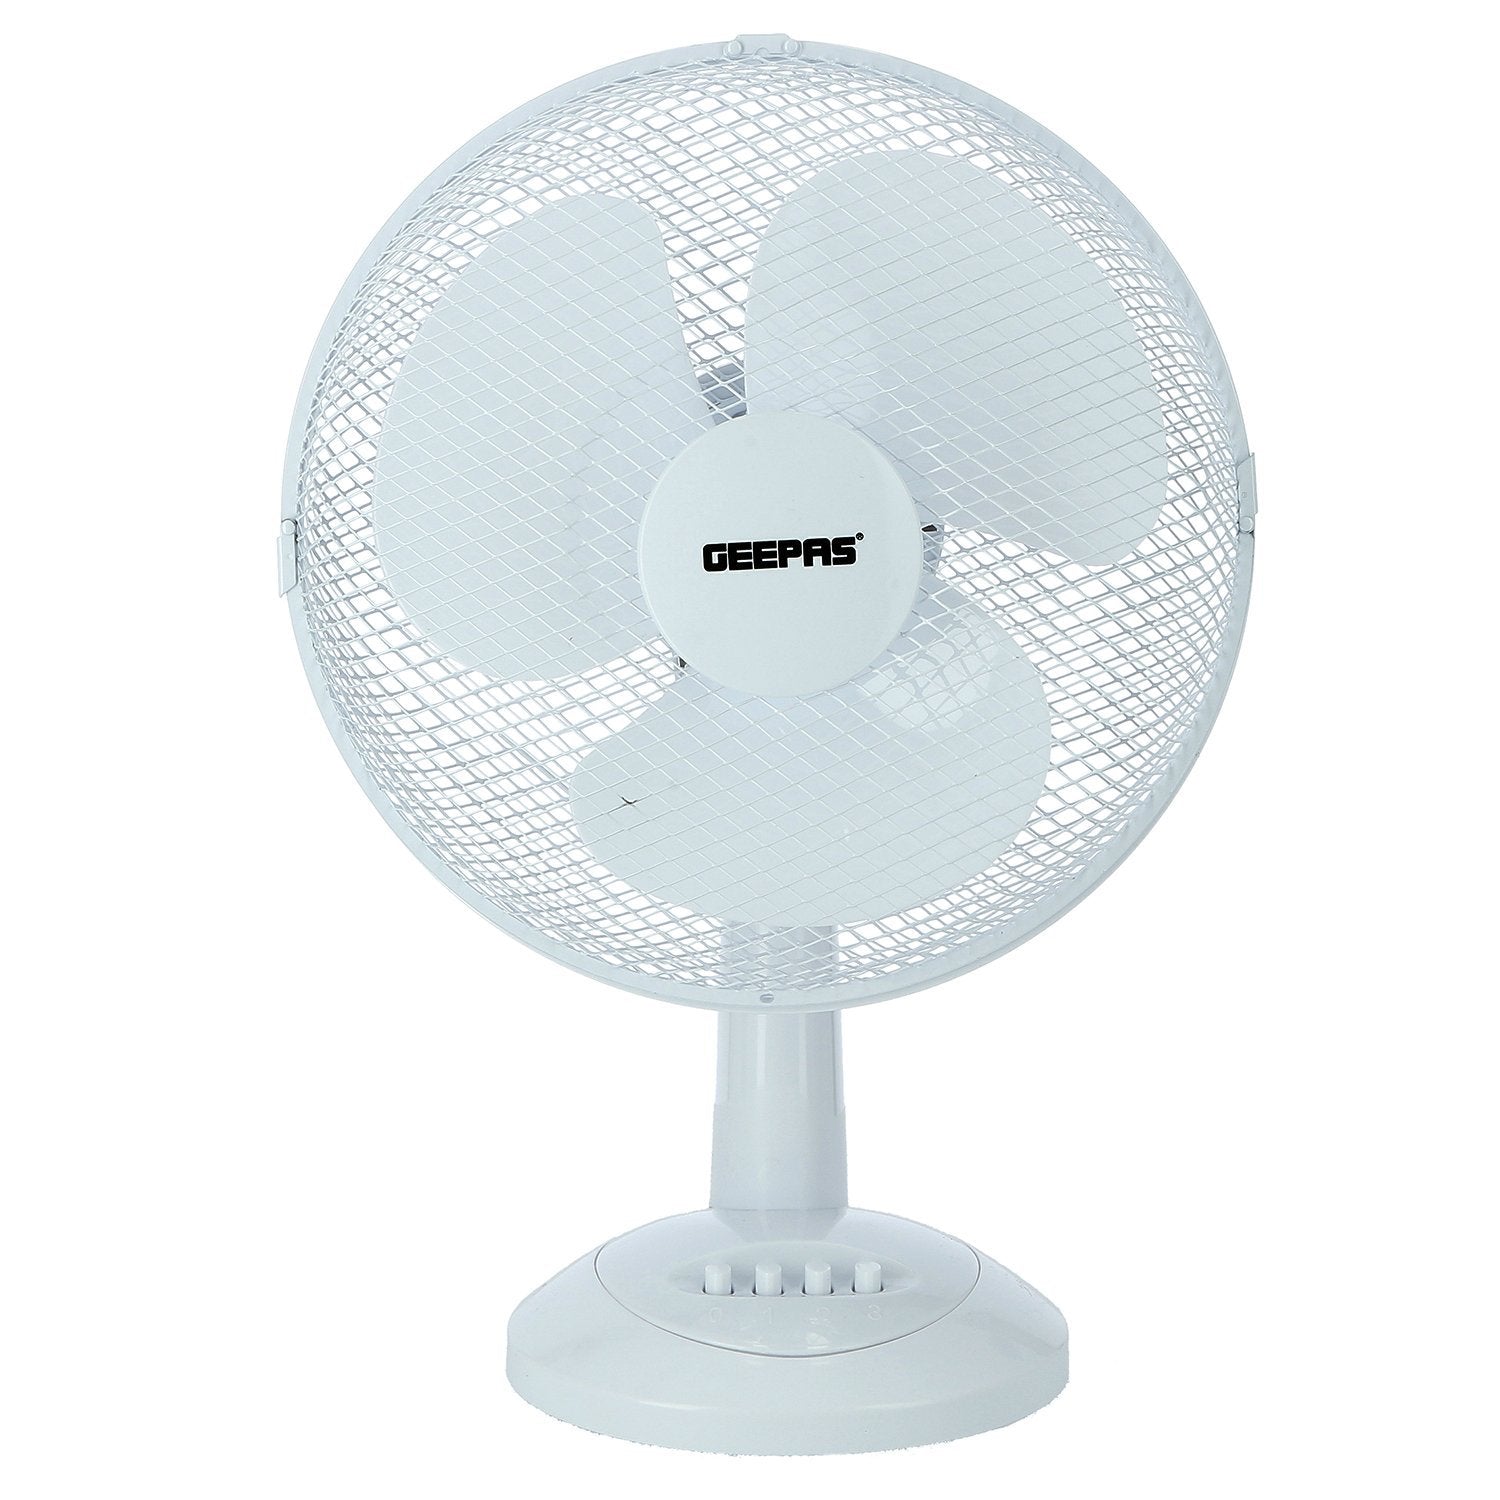 The 12 inch white electric cooling fan placed on a transparent white backgorund.